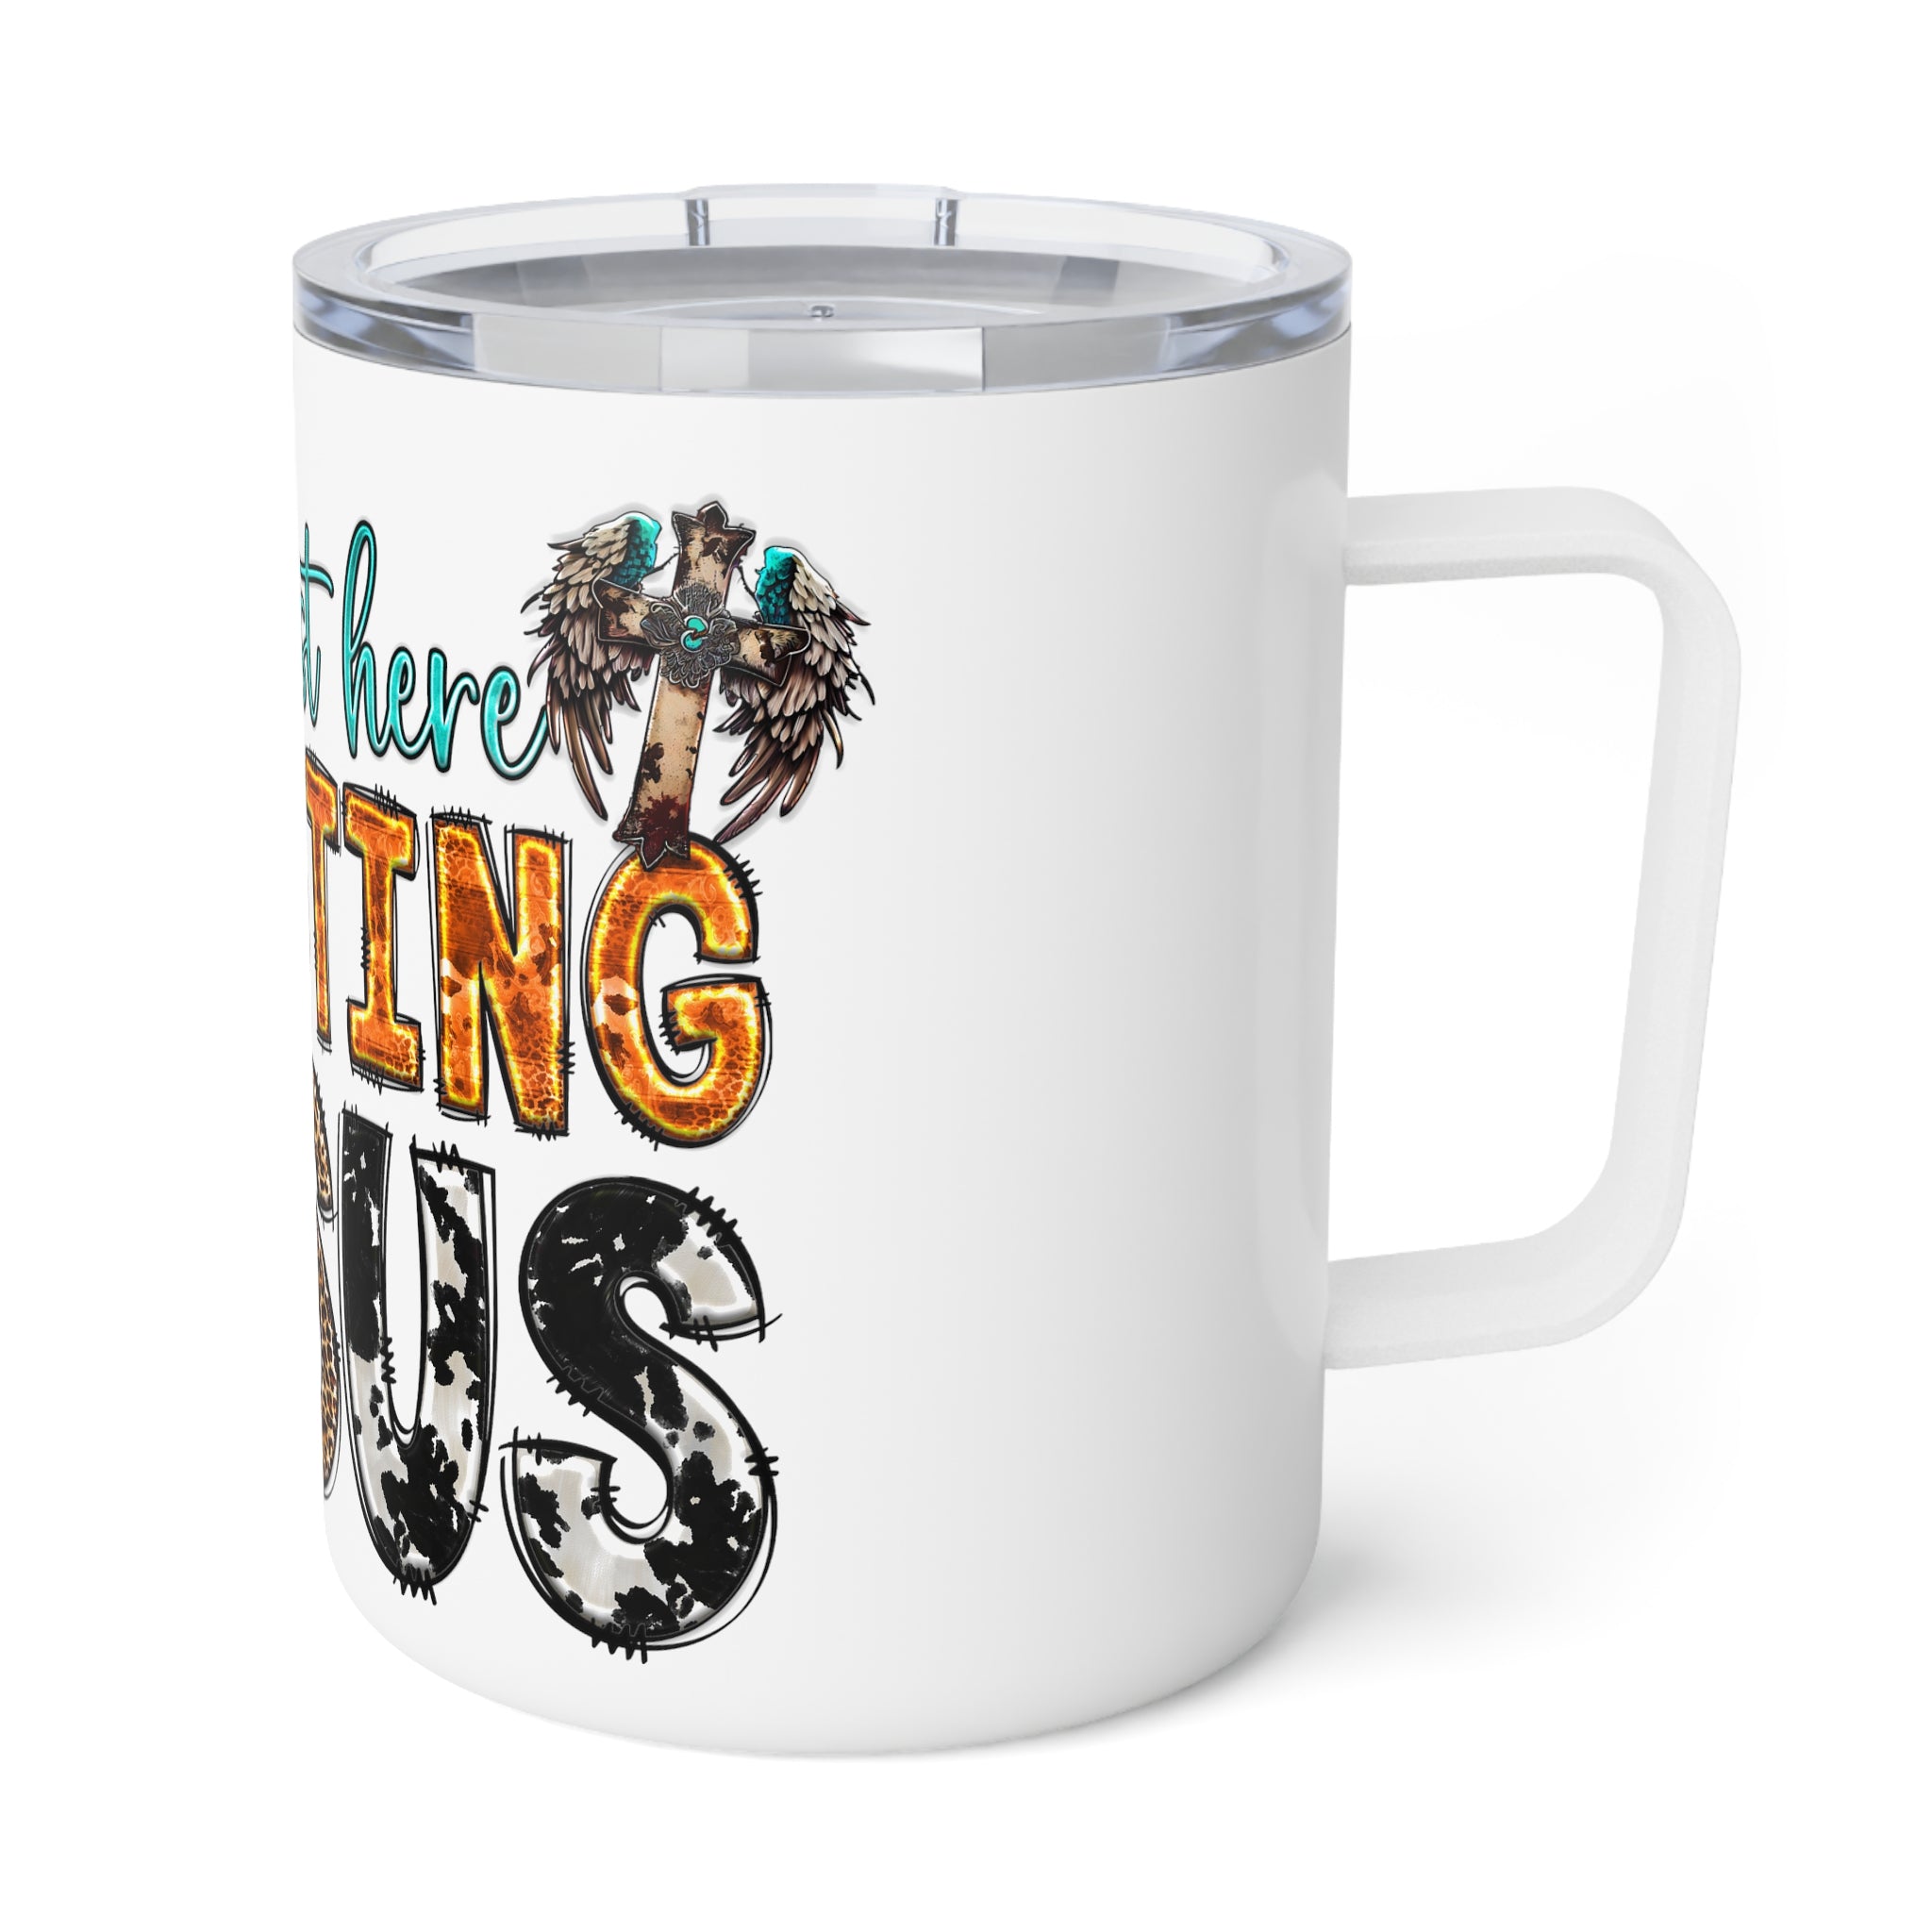 Humorous Conversation Starter at Bible Study. Embrace Faith and Trust in Jesus with Our 'I'm Just Here Trusting Jesus' Insulated Coffee Mug - 10oz: Start Your Day with Inspiration and Warmth